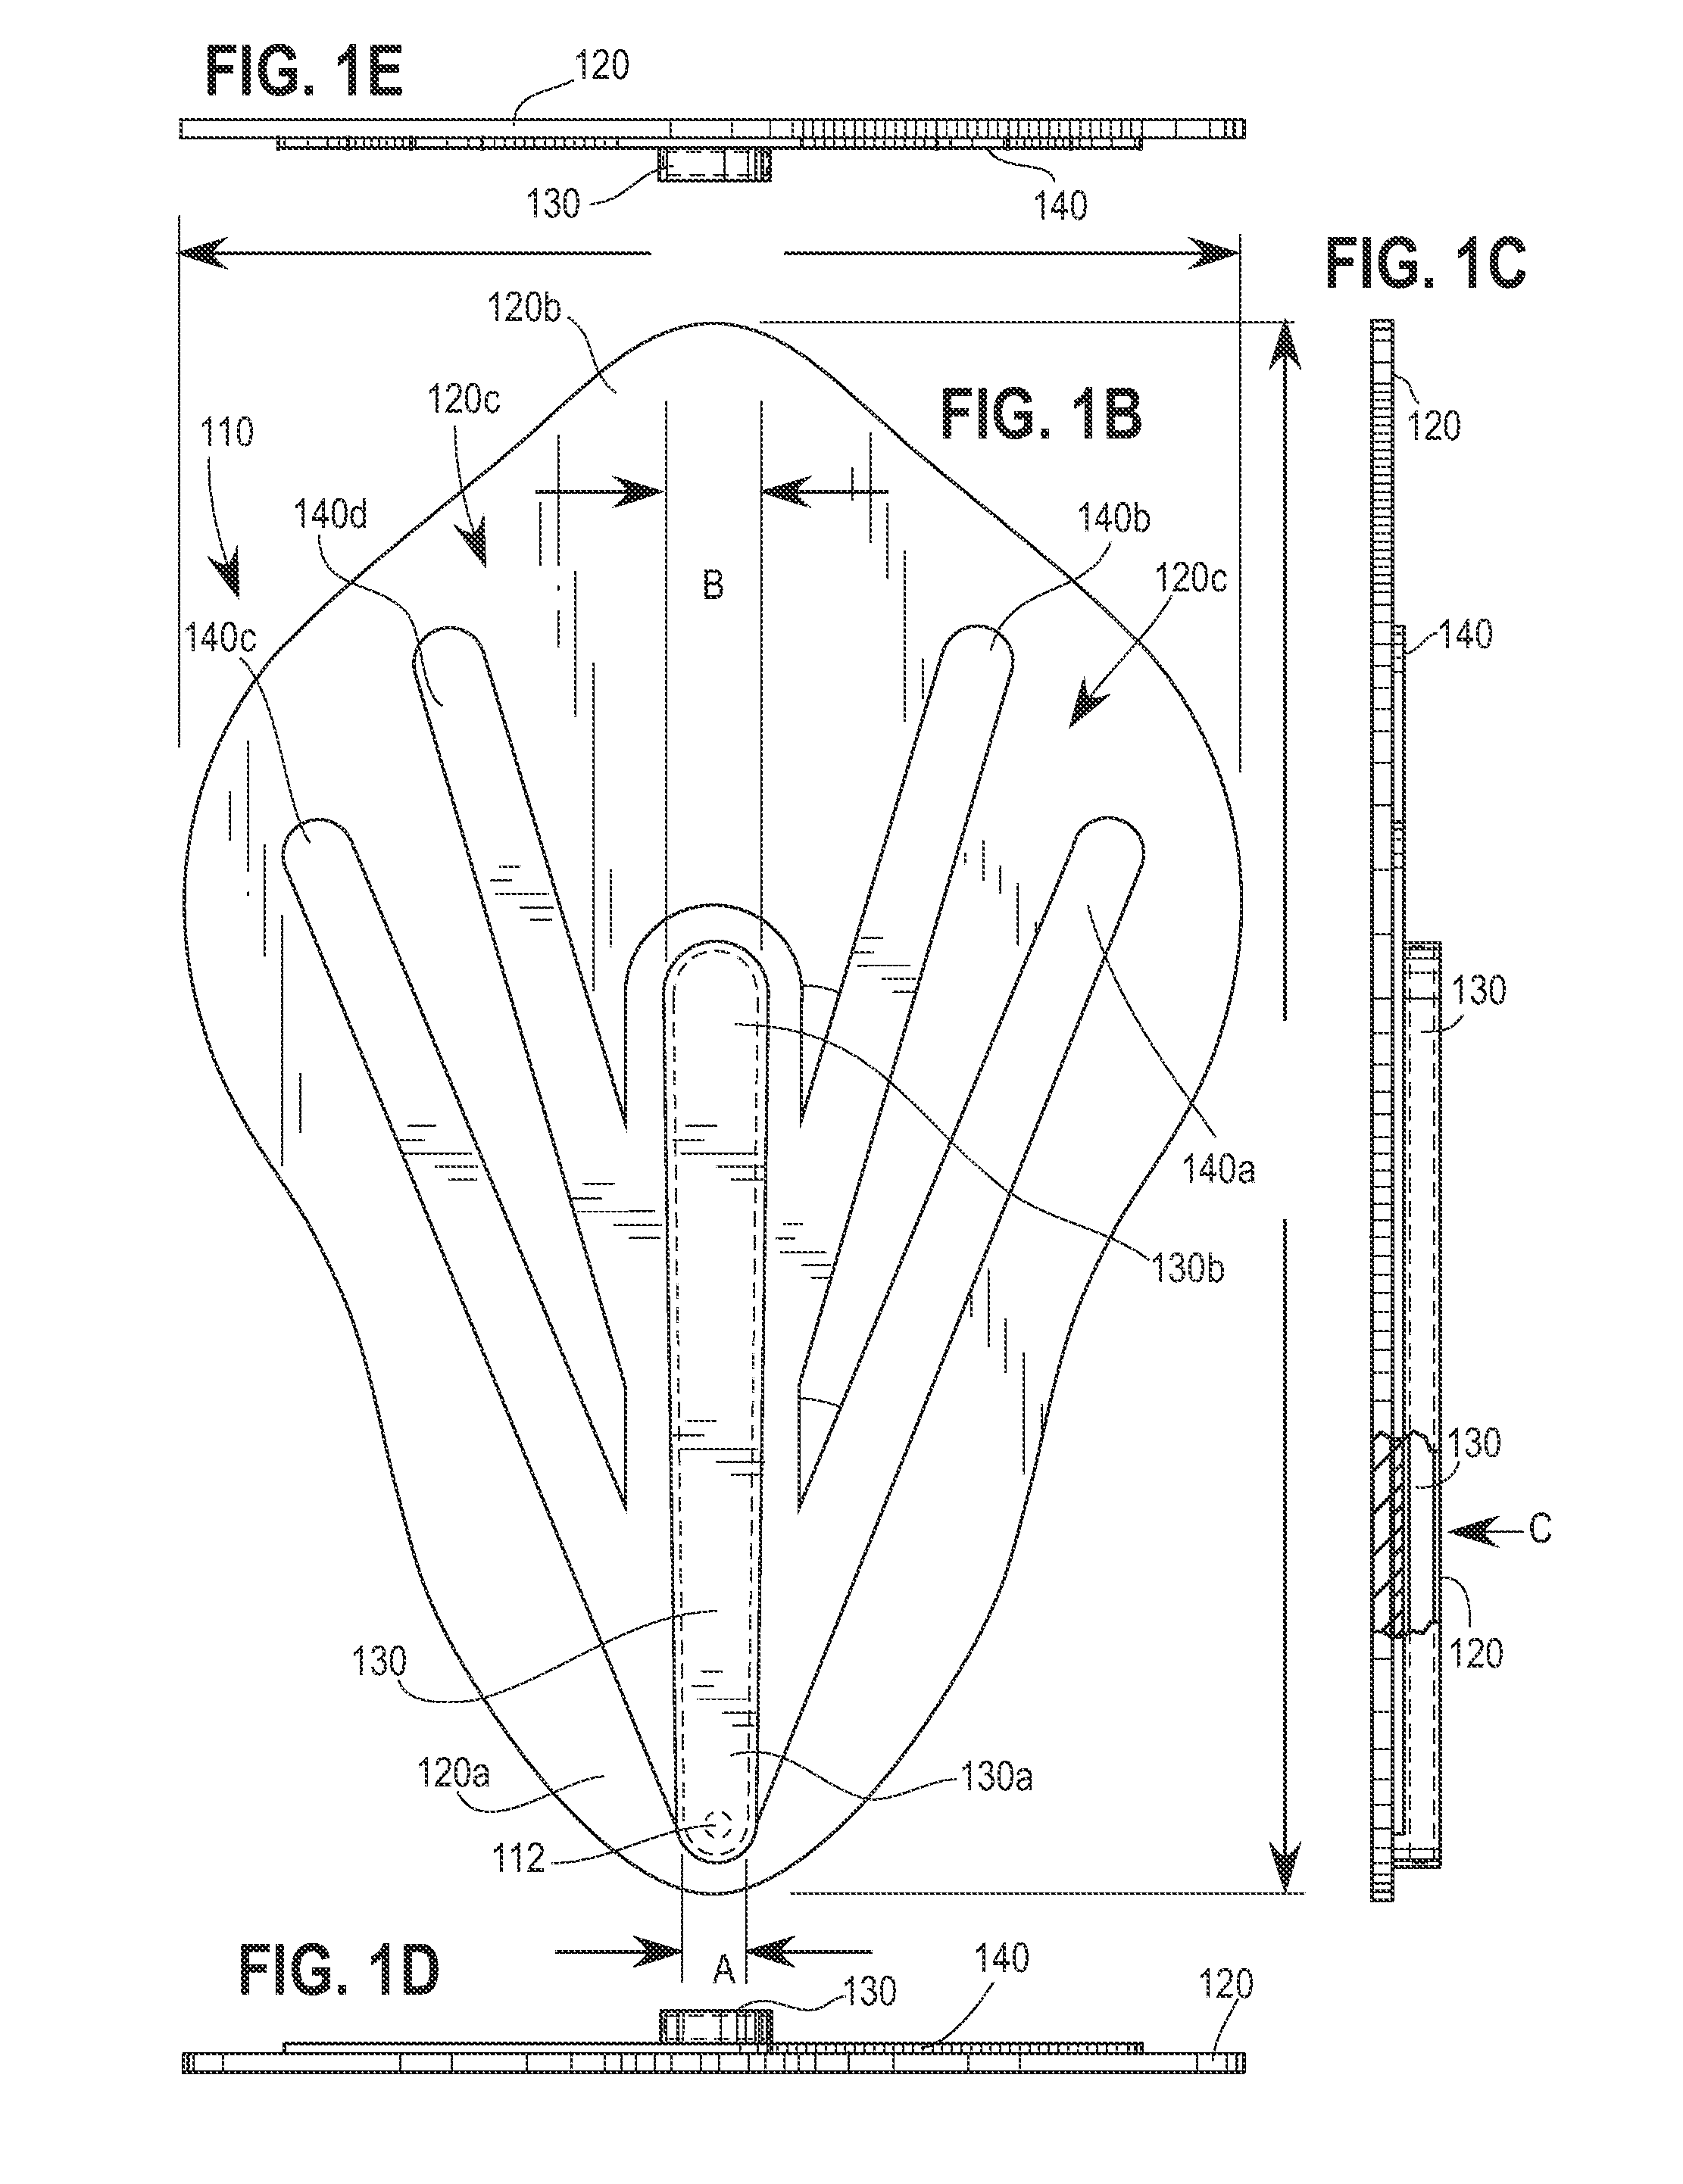 Method and apparatus for assisting in wound closure